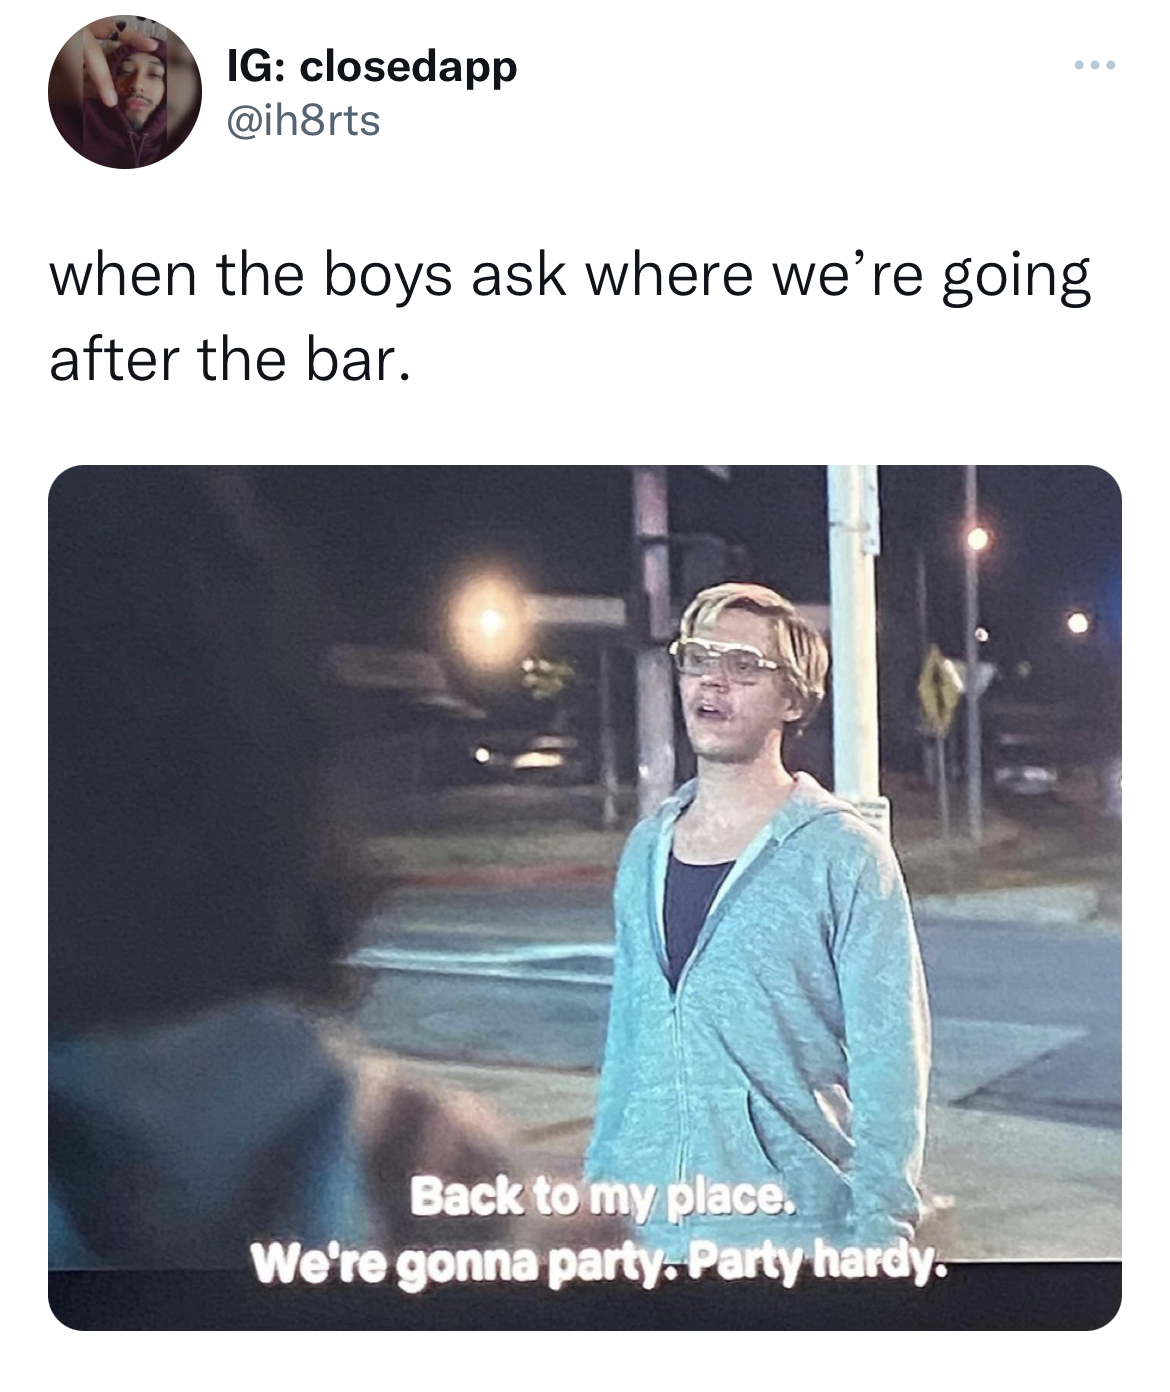 Savage Tweets - media - 1627 Ig closedapp when the boys ask where we're going after the bar. Back to my place. We're gonna party. Party hardy.